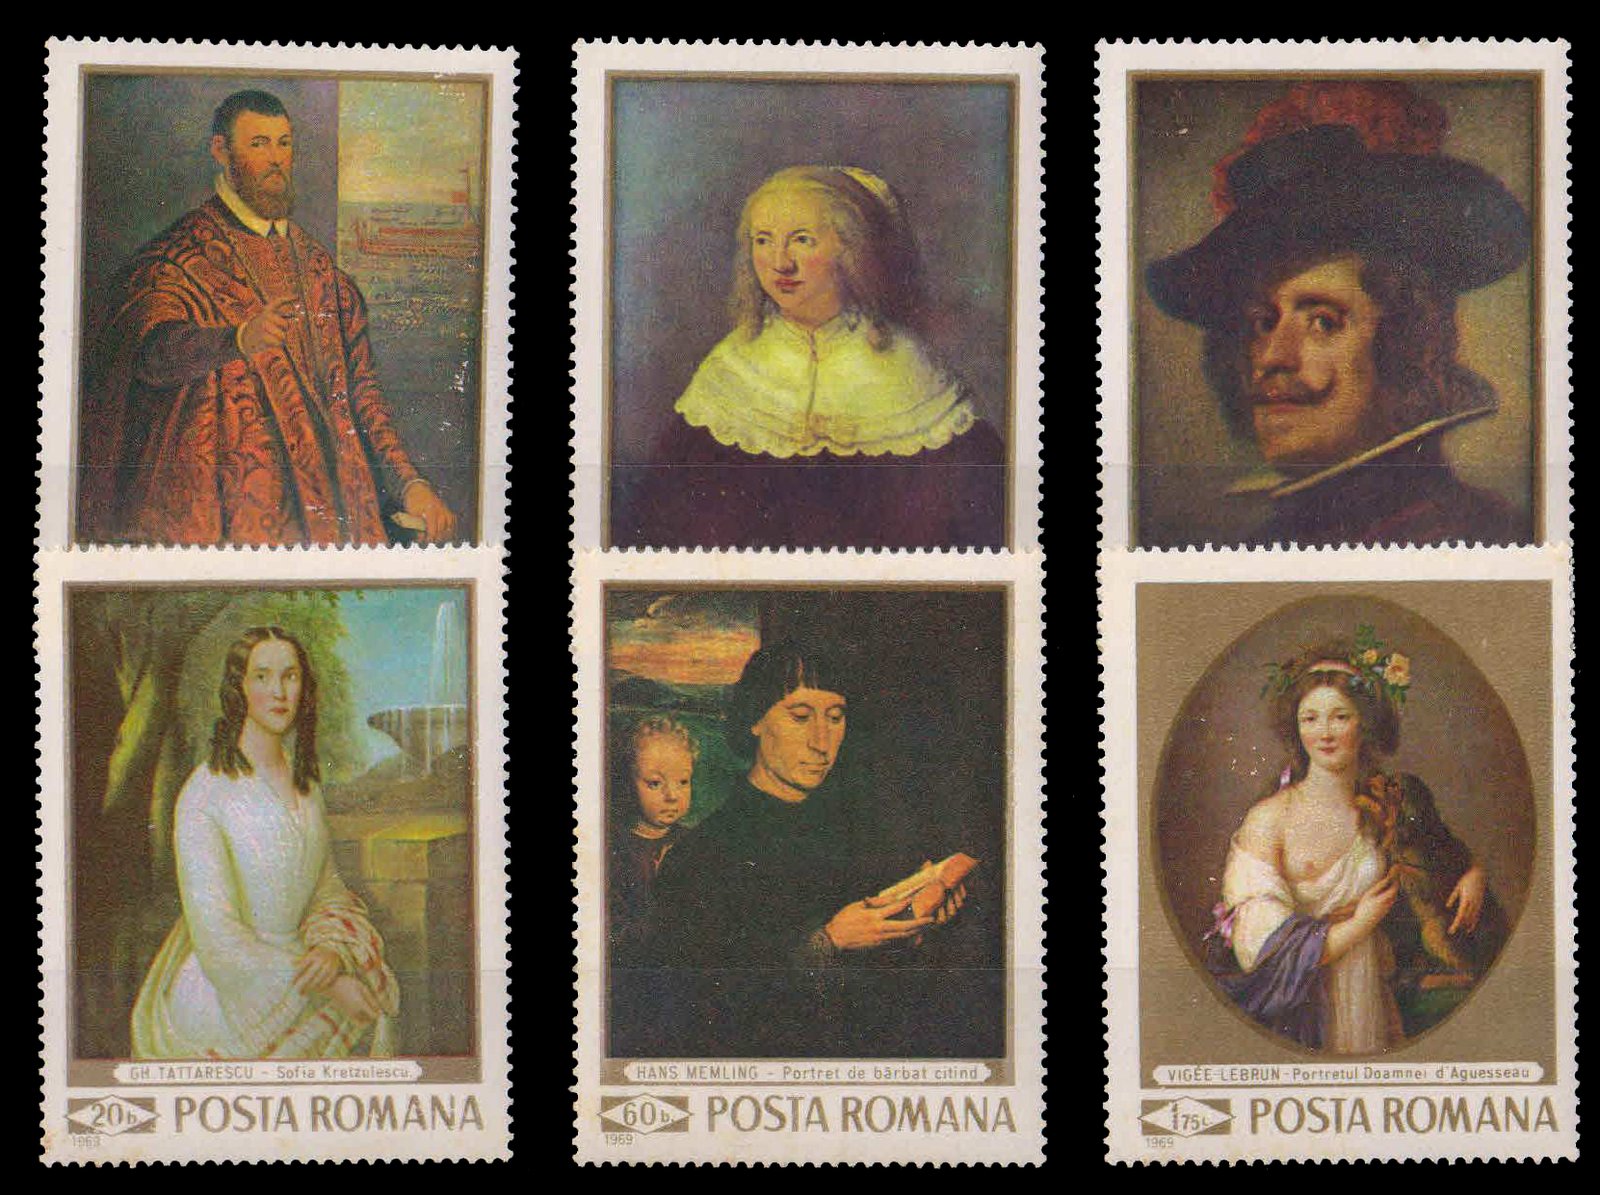 ROMANIA 1969-Paintings in the National Gallery, Bucharest, Set of 6, MNH, S.G. 3658-63-Cat � 6-